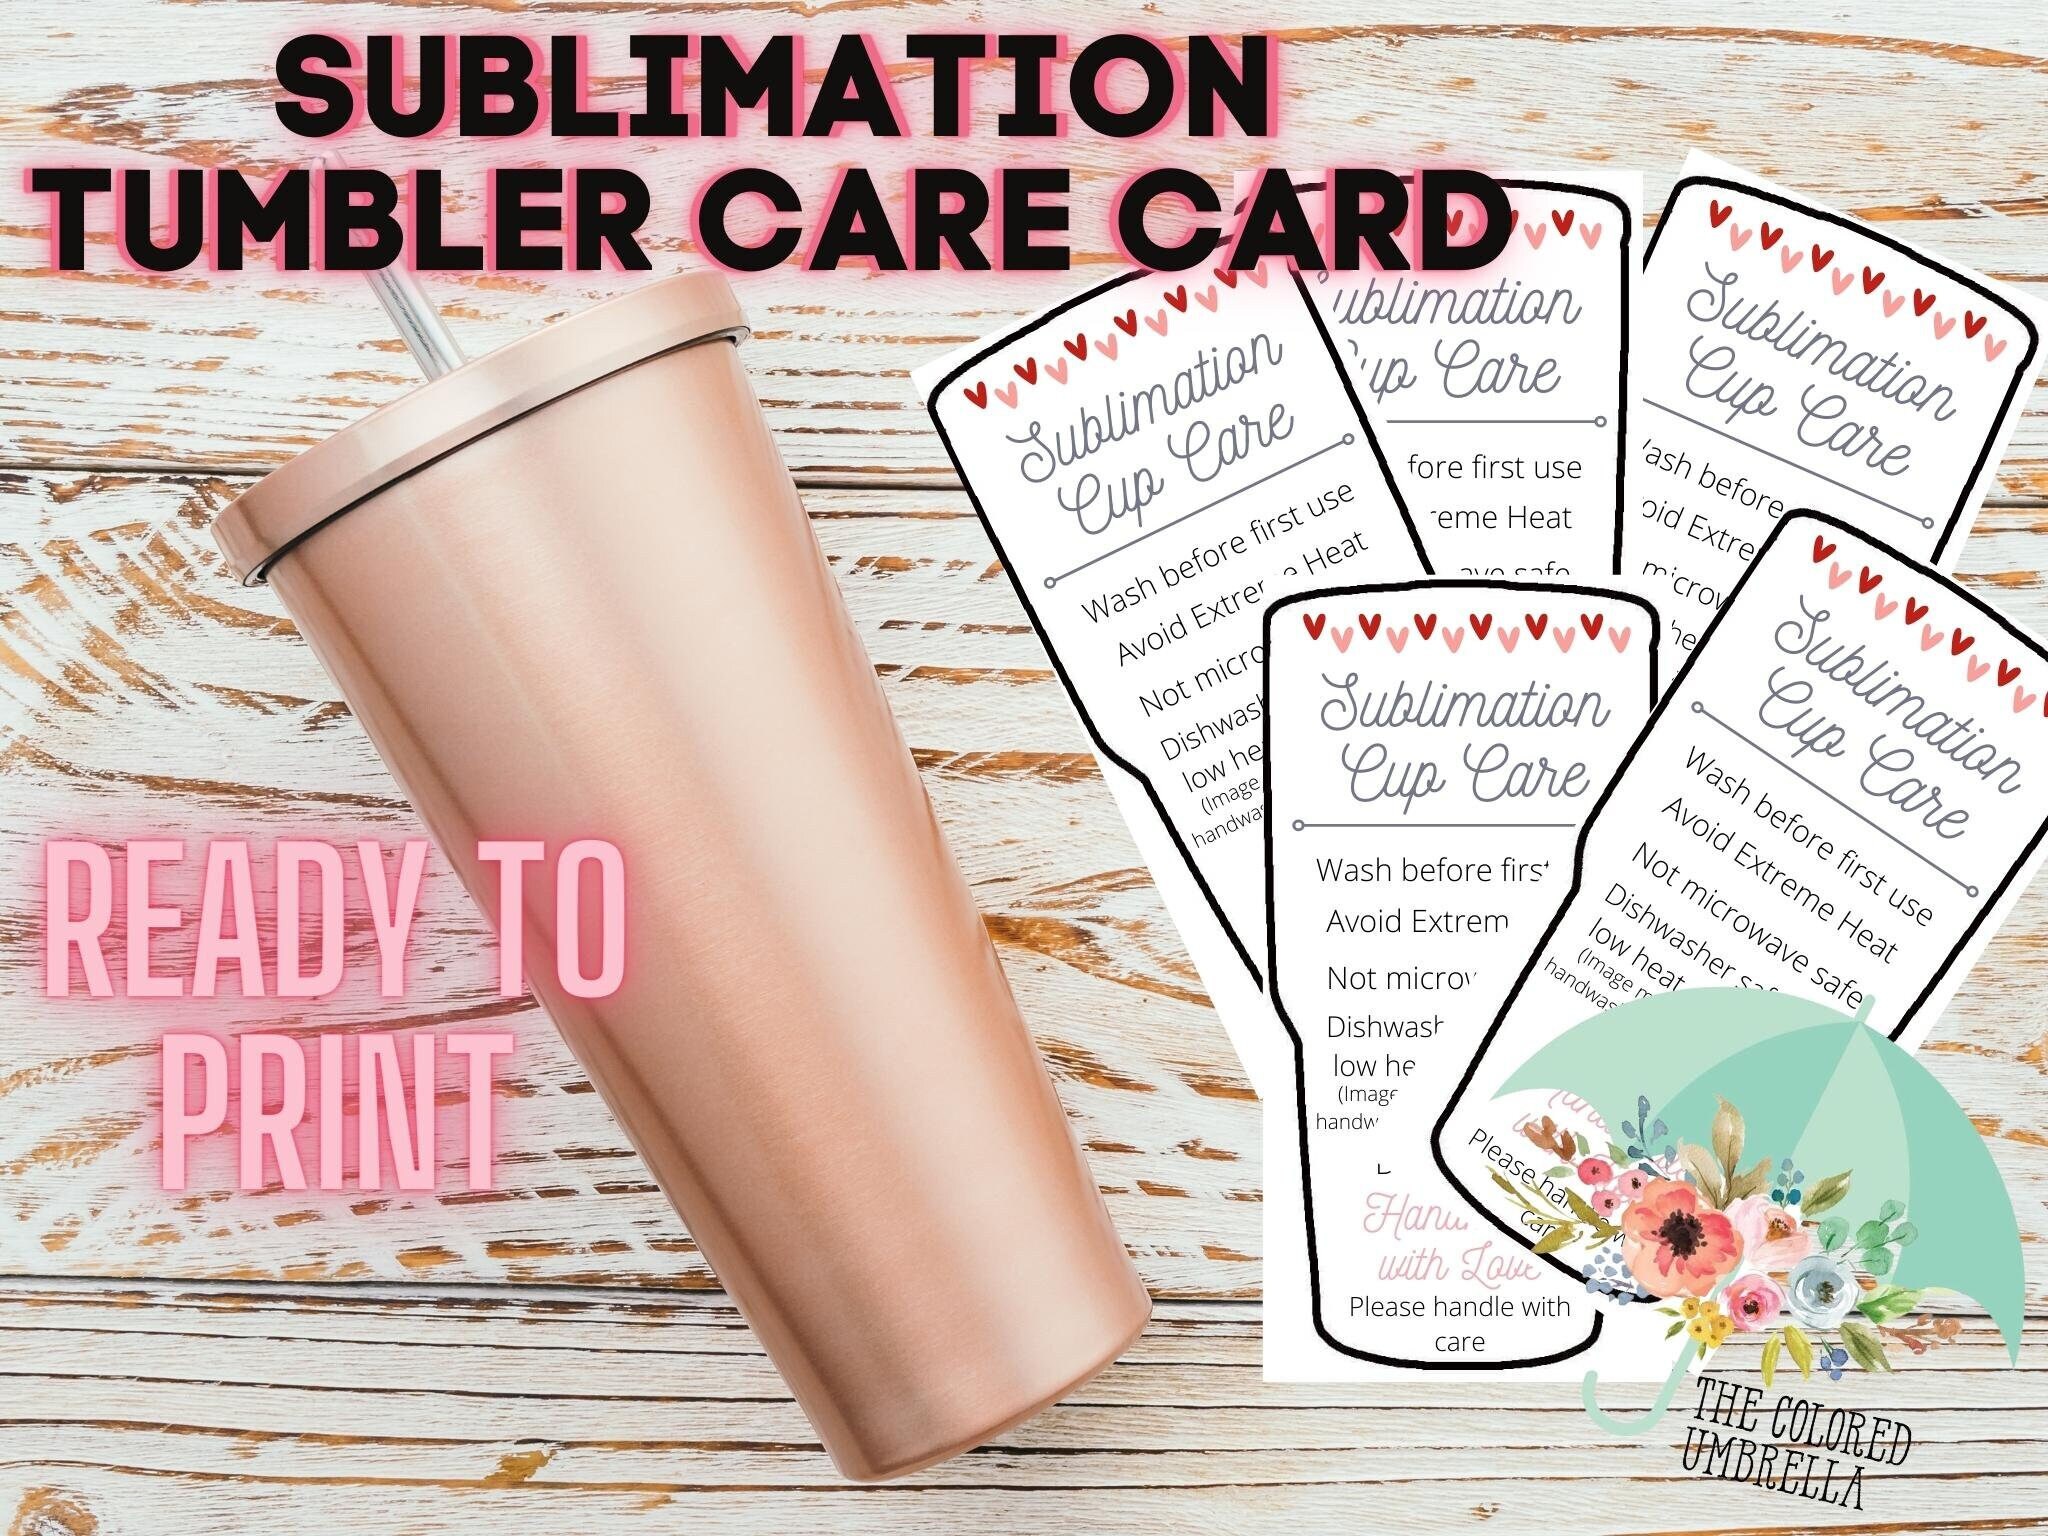 Tumbler Cup Care Instructions Card, Mug, Small Business Supplies